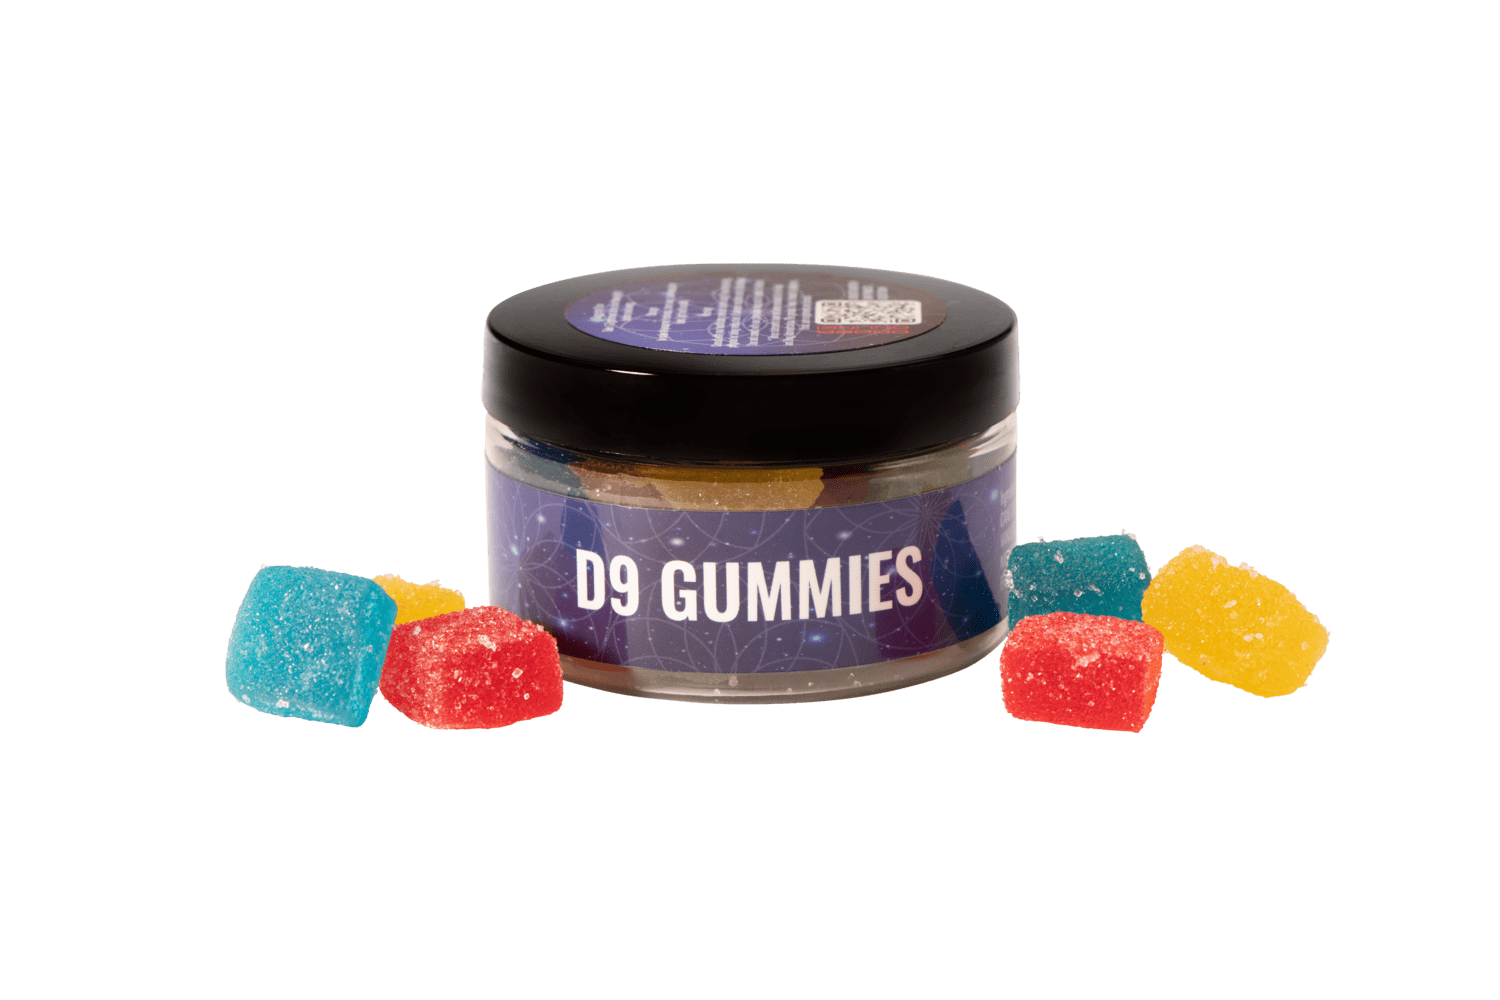 D9 Gummies assorted flavors picture